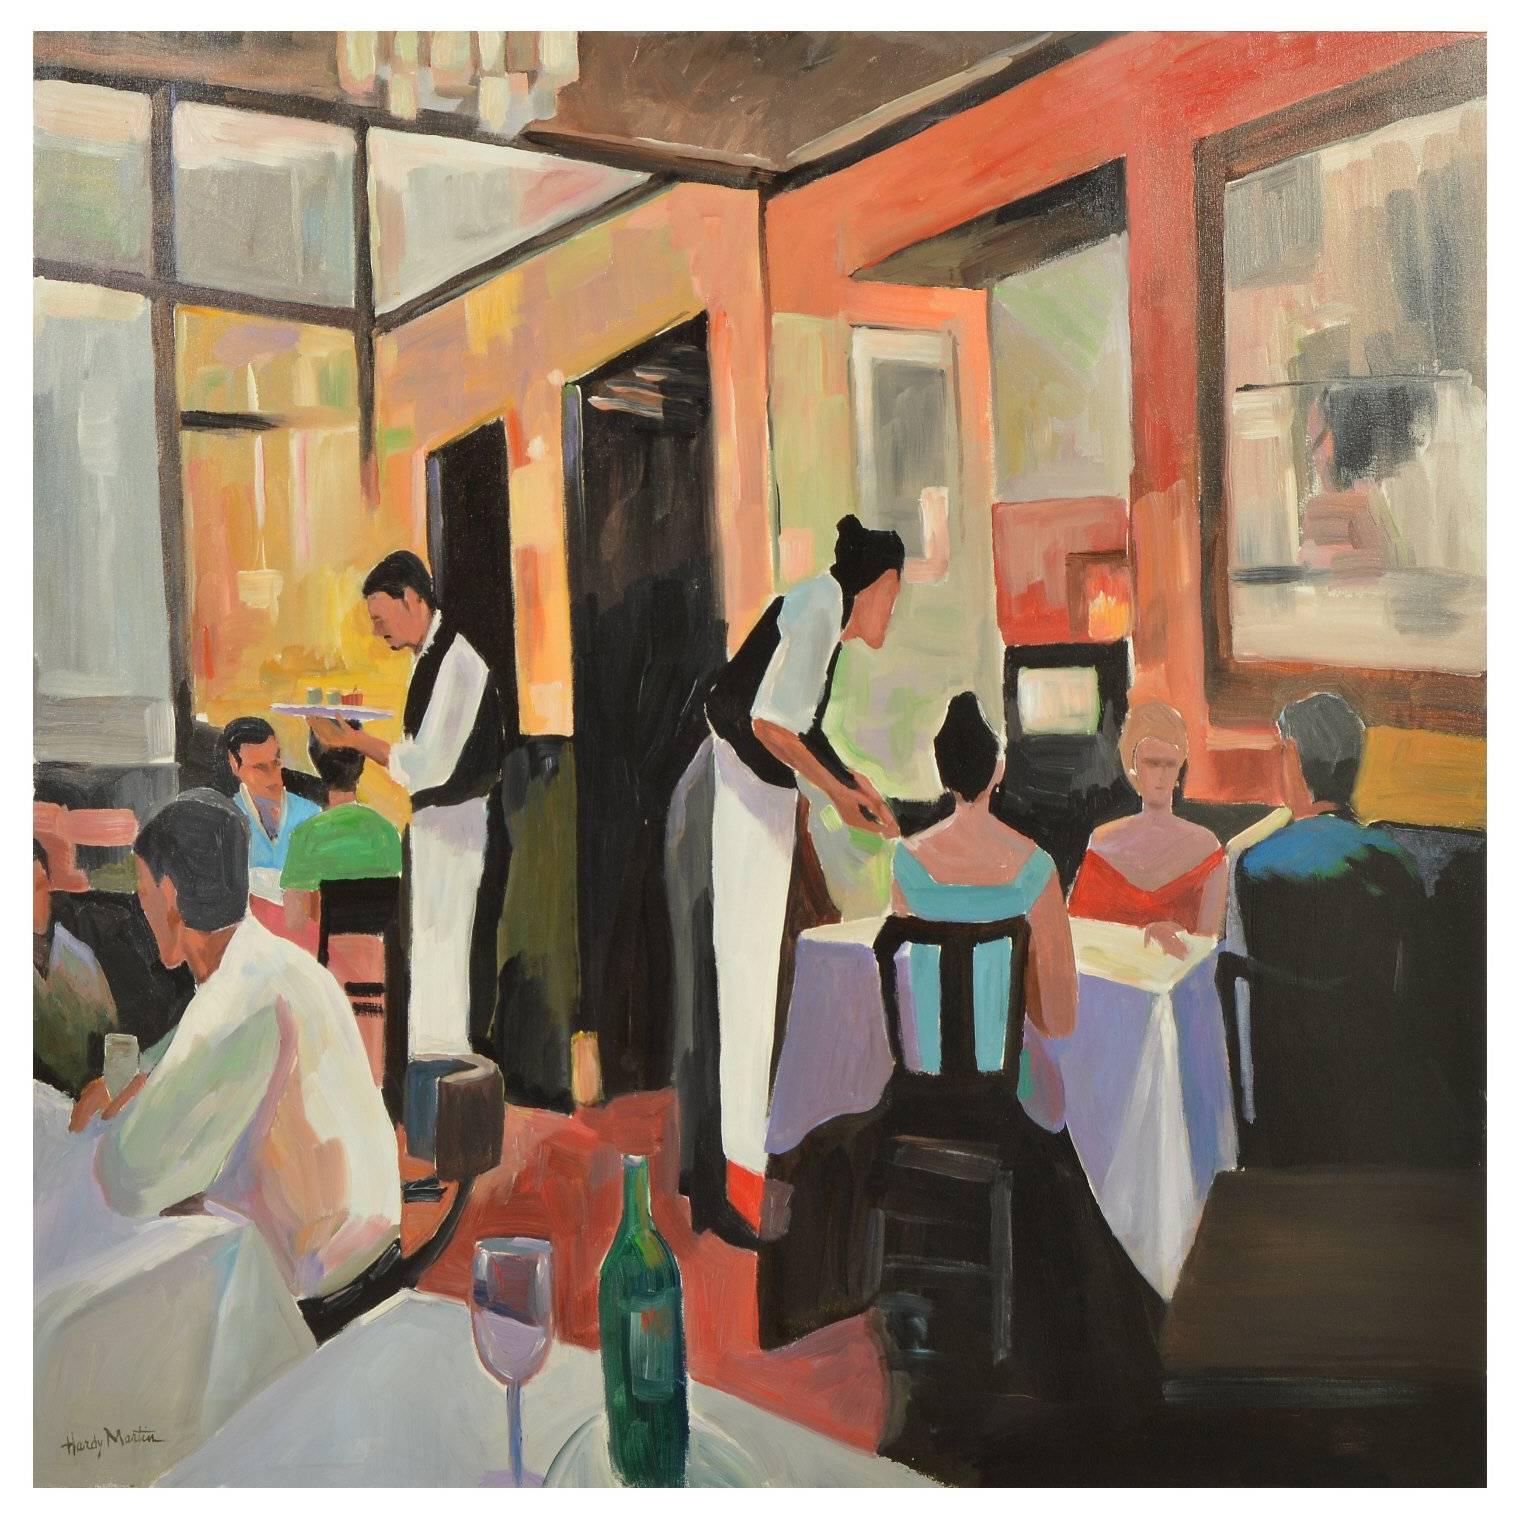 Le Cafe French Restaurant Scene Signed Original Painting For Sale